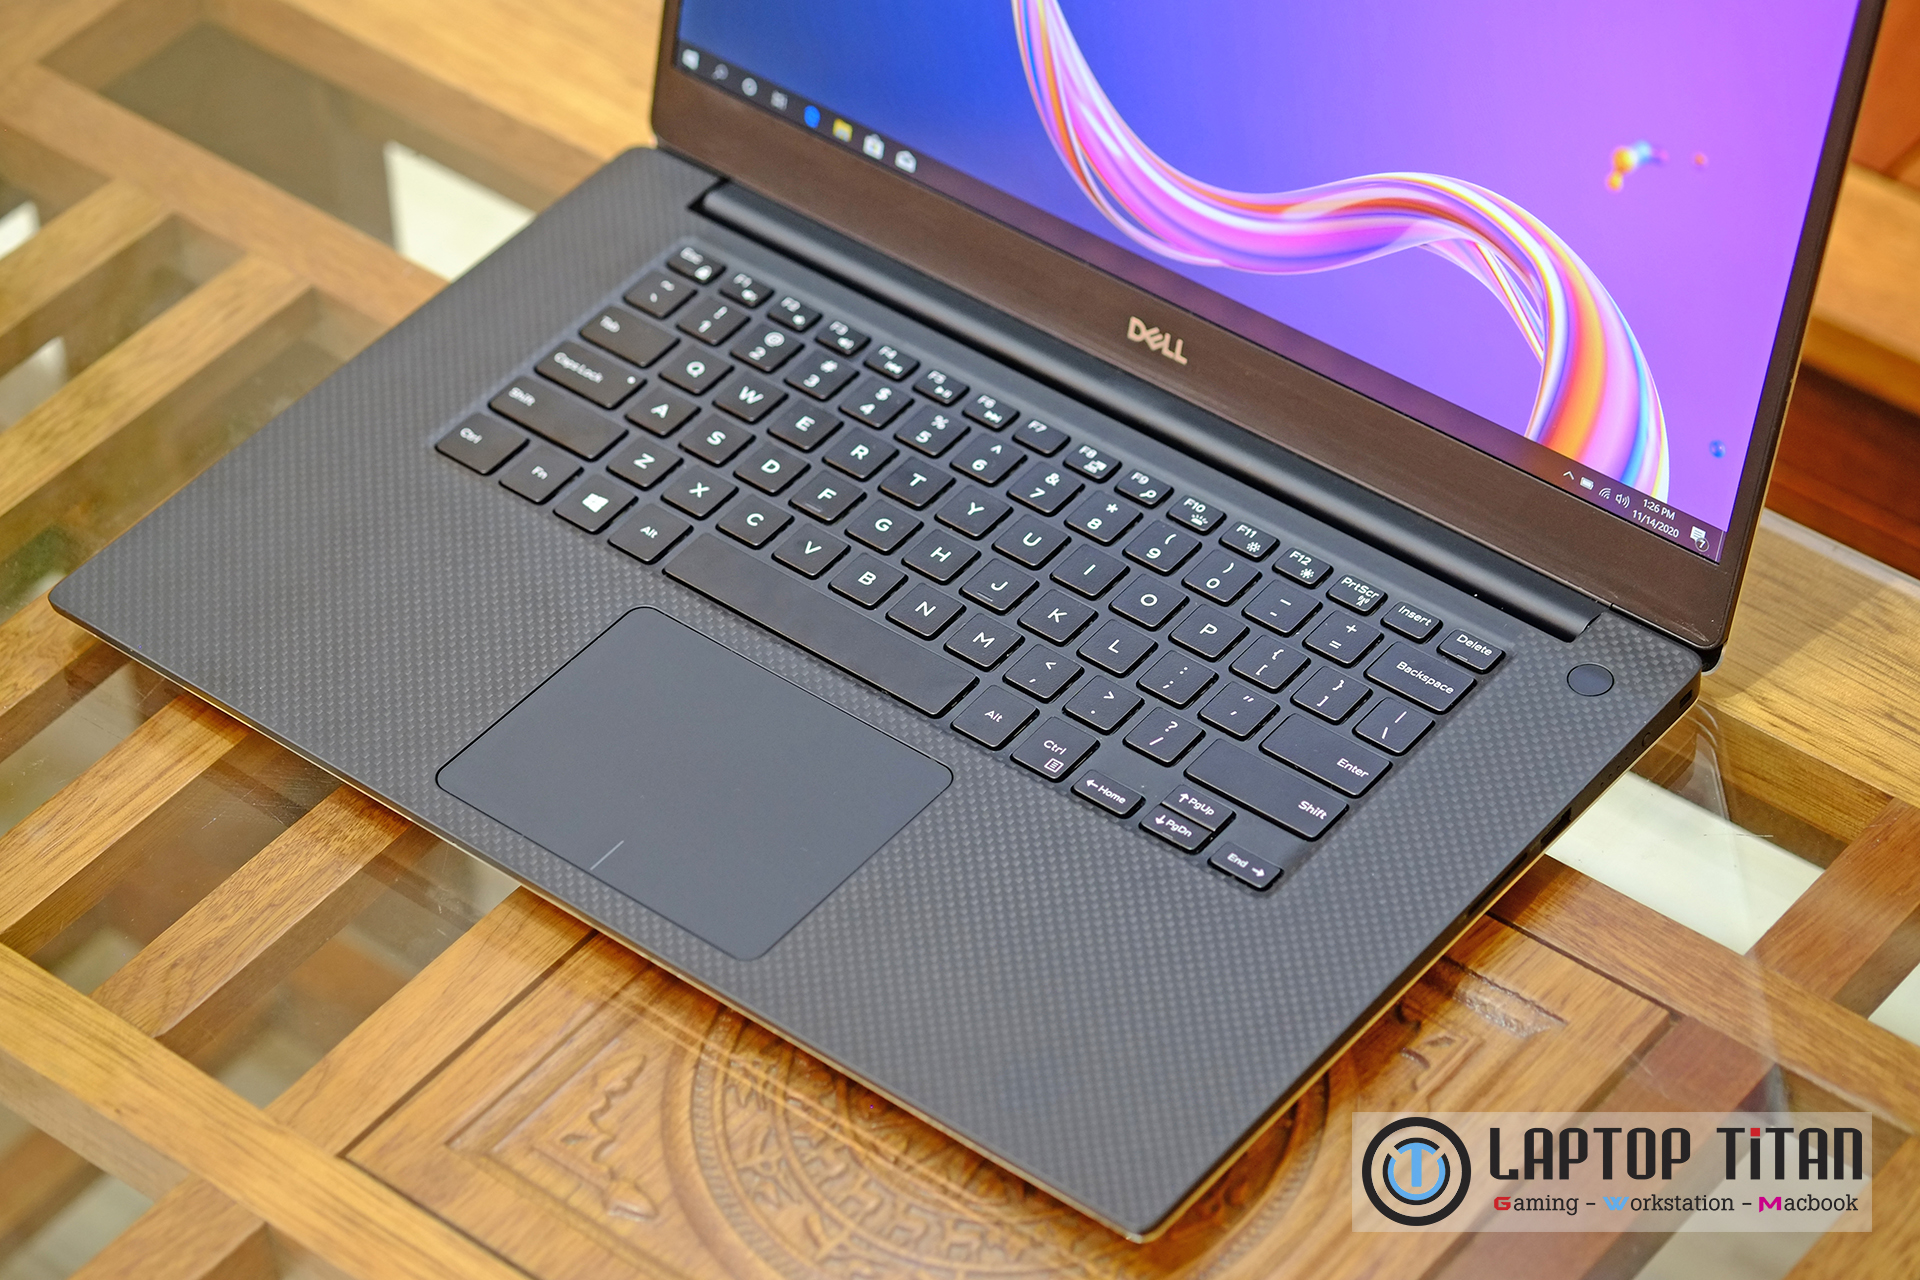 Dell Xps 15 7590 004